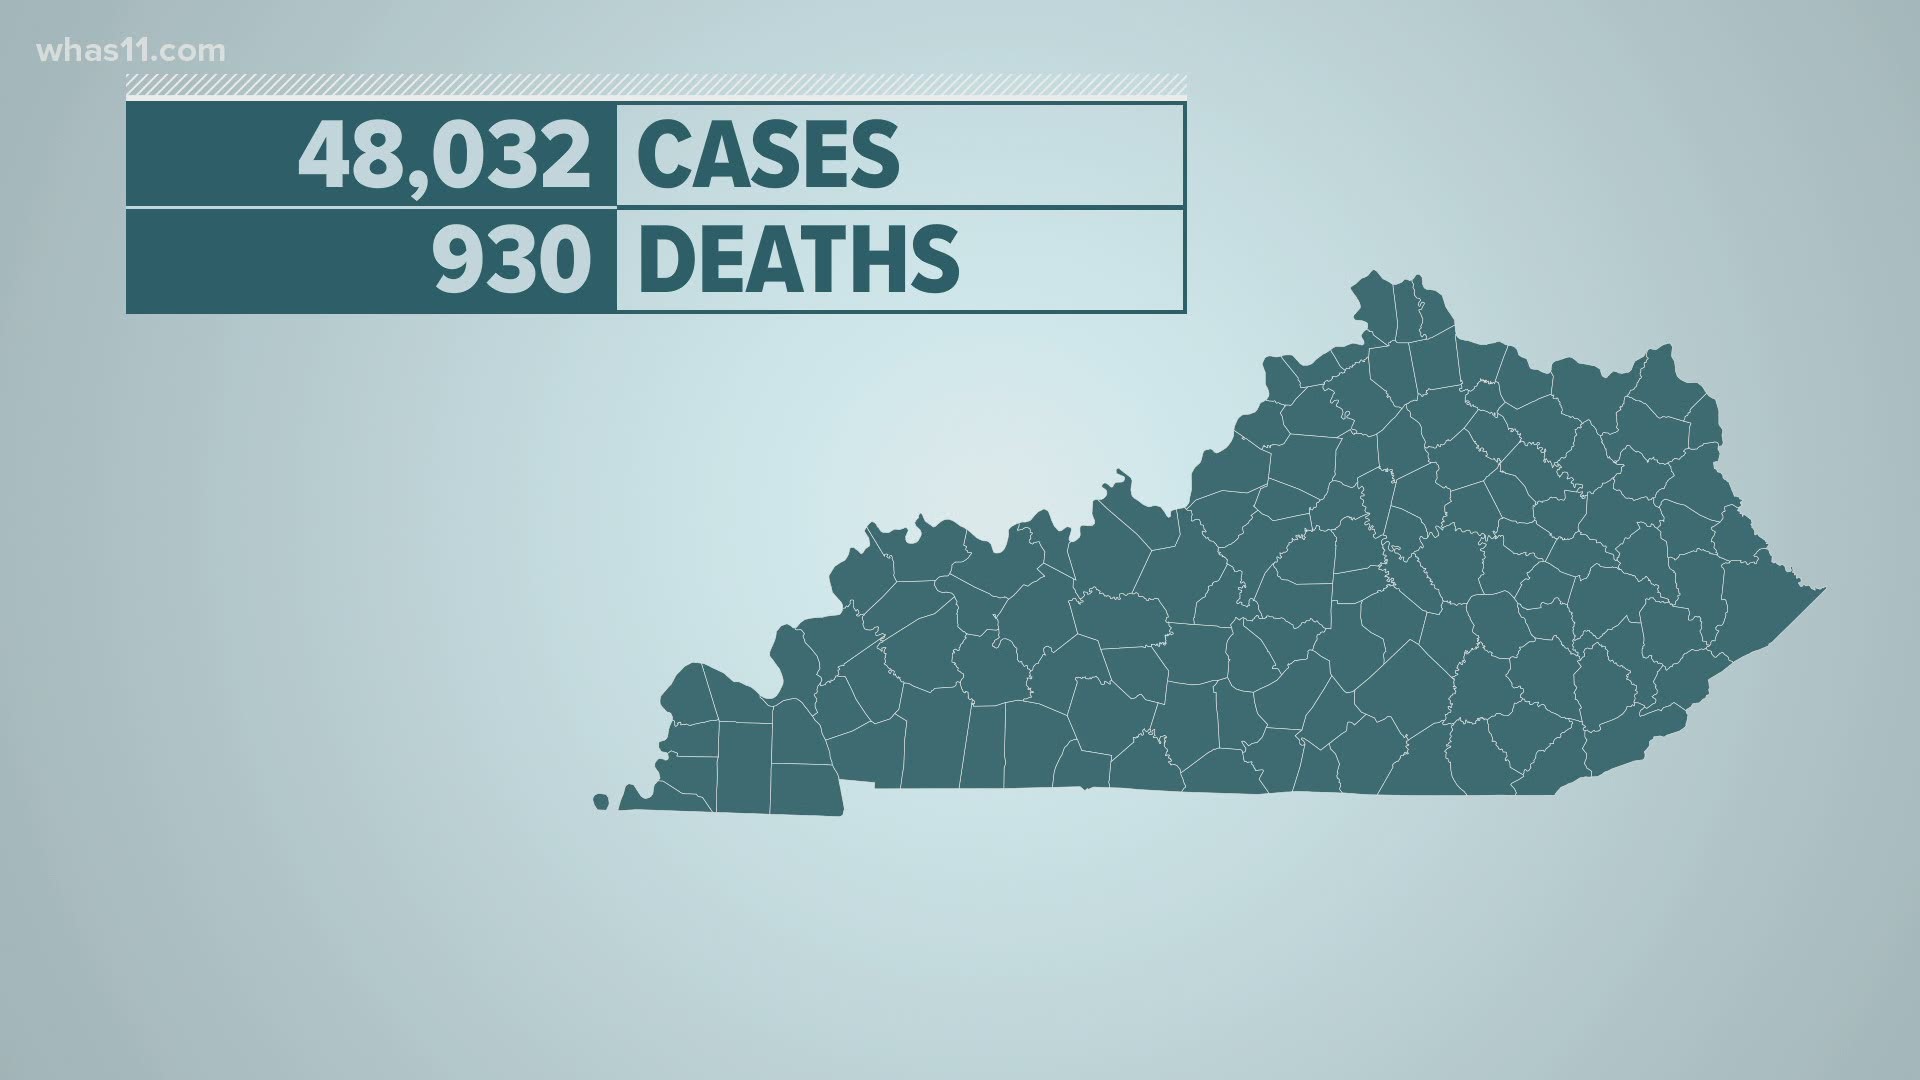 Kentucky reported more than 4,500 new cases this week as the state total pushed over 48,000 total cases since tracking began in March.